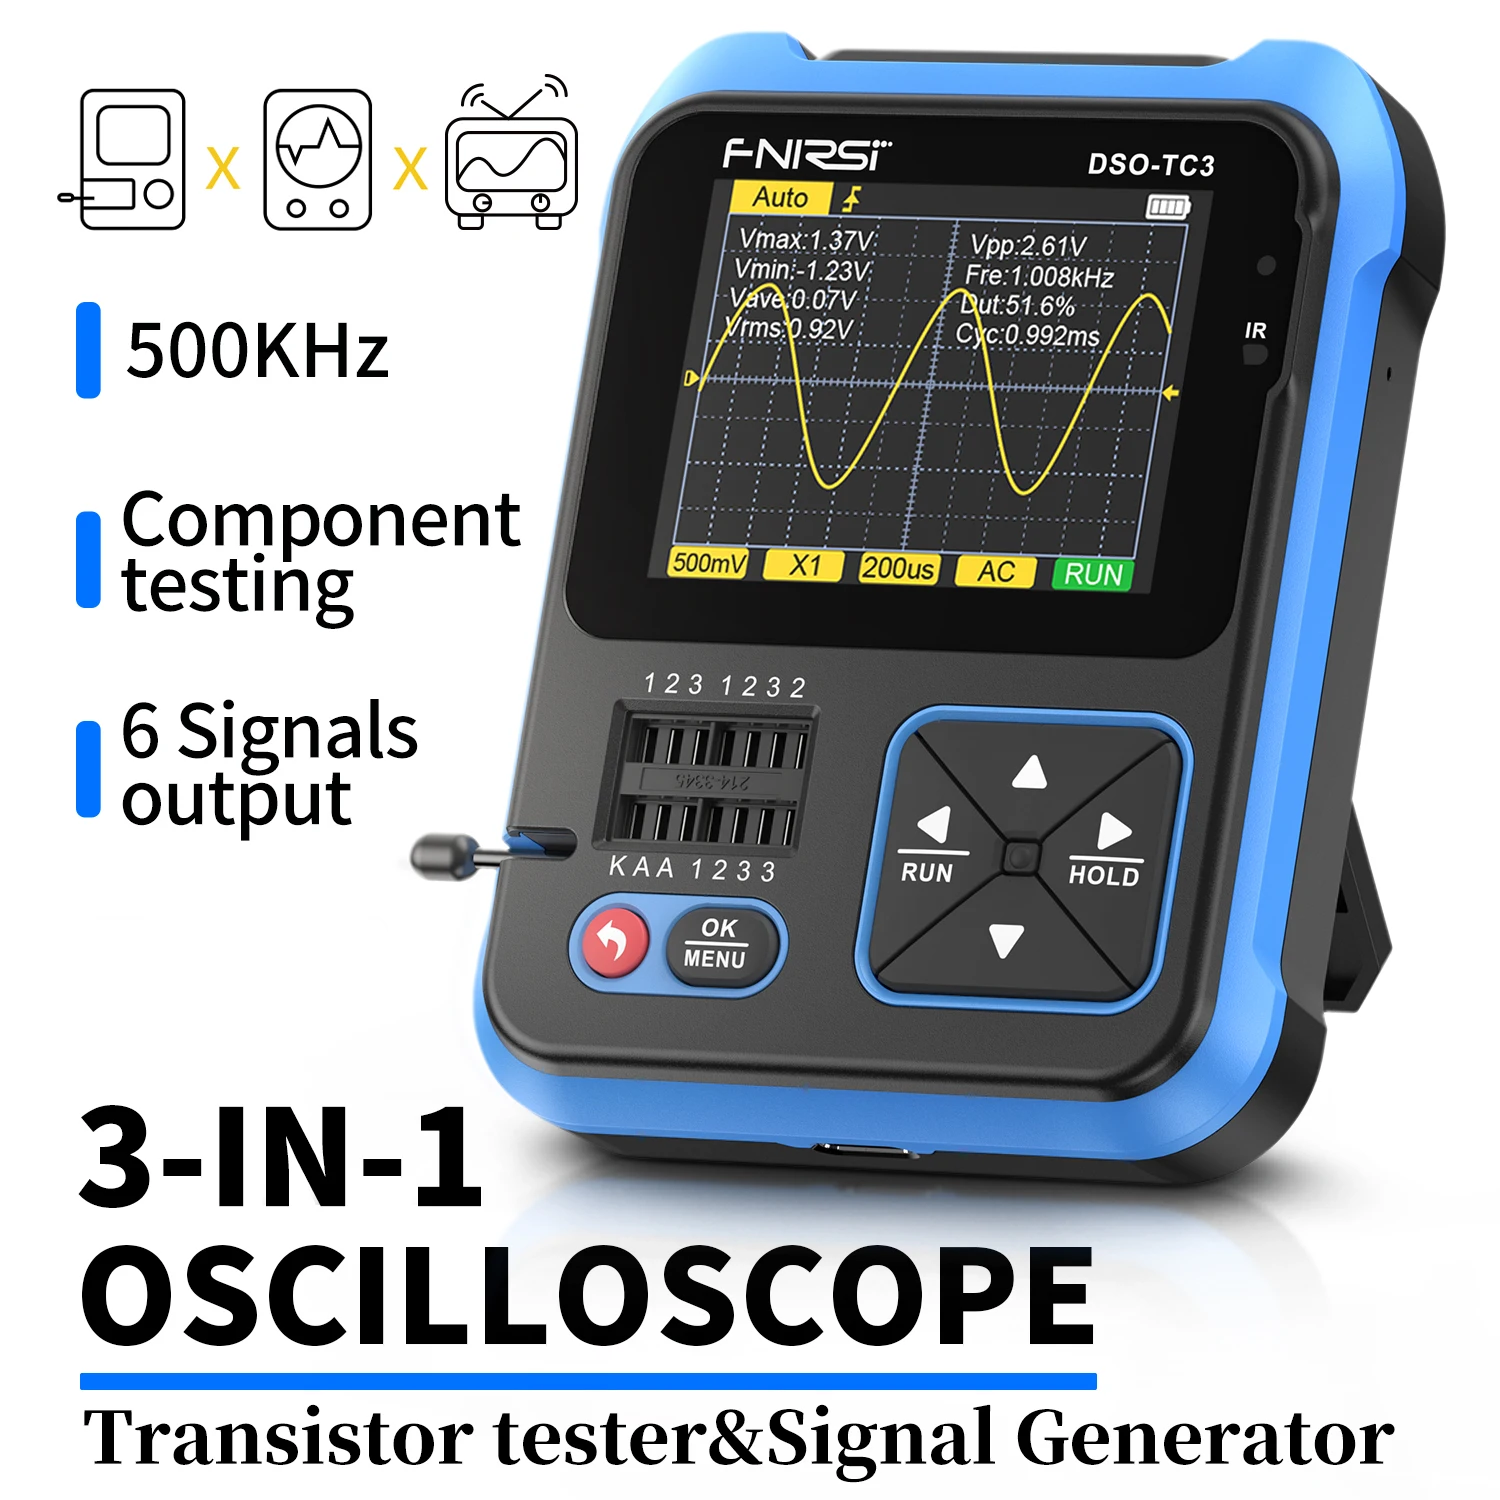 

DSO-TC3 Digital Oscilloscope 10MS/s Sampling Rate 500kHz Bandwidth Support Diode PWM Out Transistor LCR Test Signal Generator